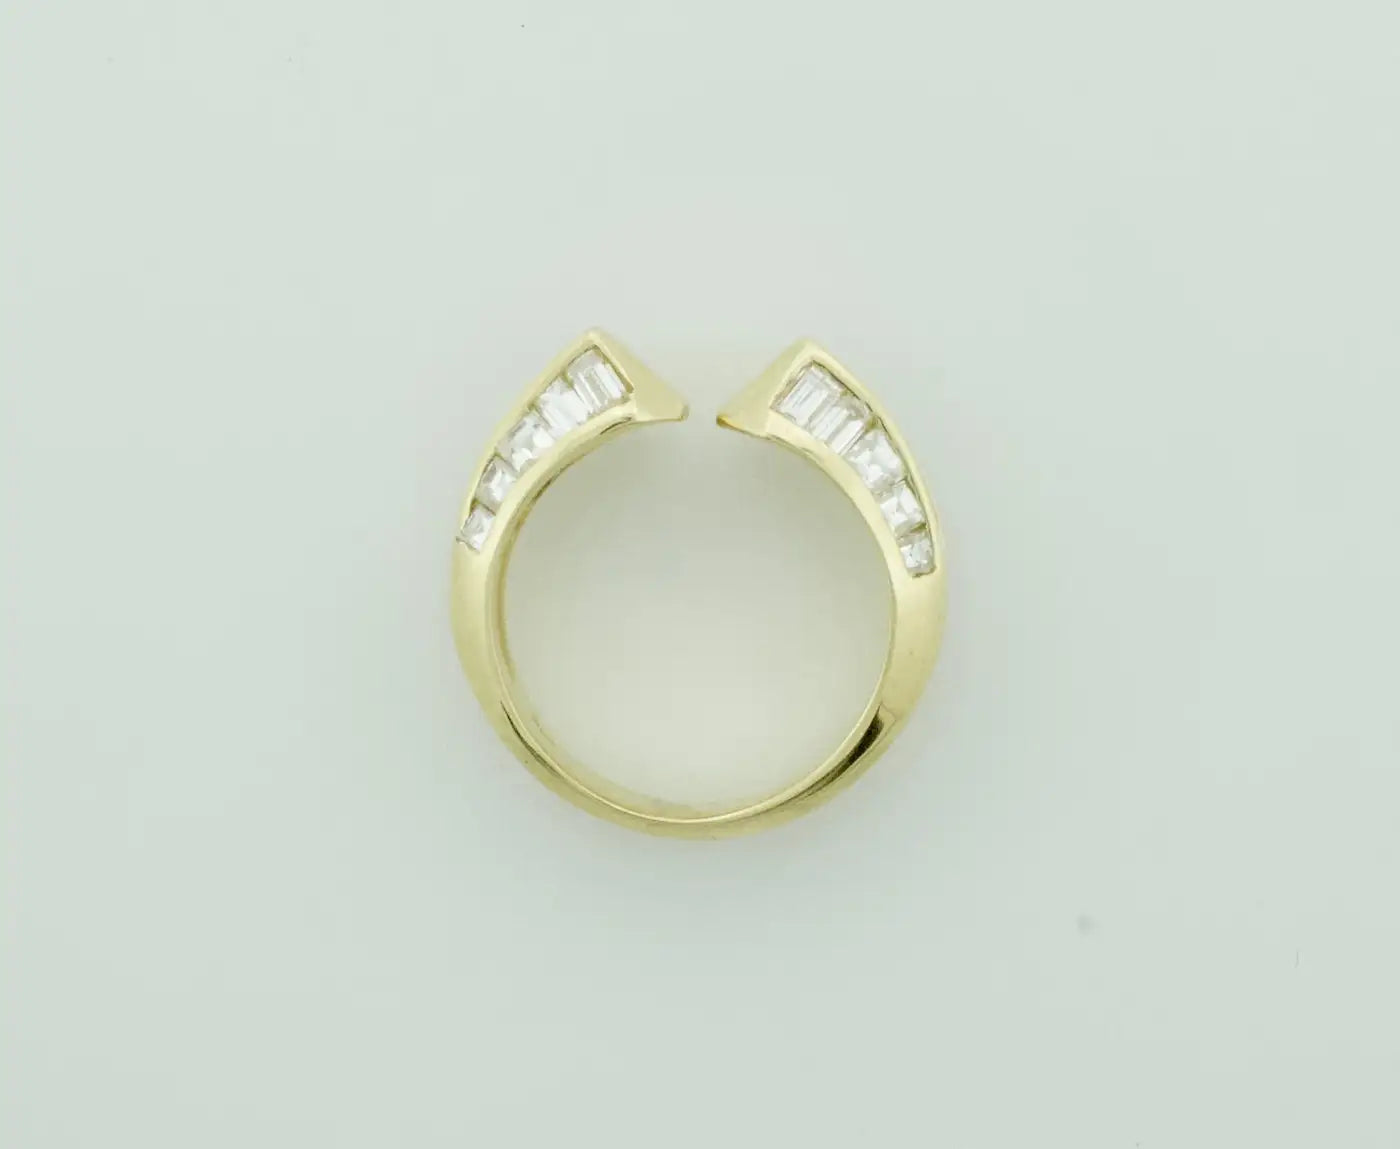 Delightful Petite Diamond Ring in Yellow Gold 1.15 Carats Total